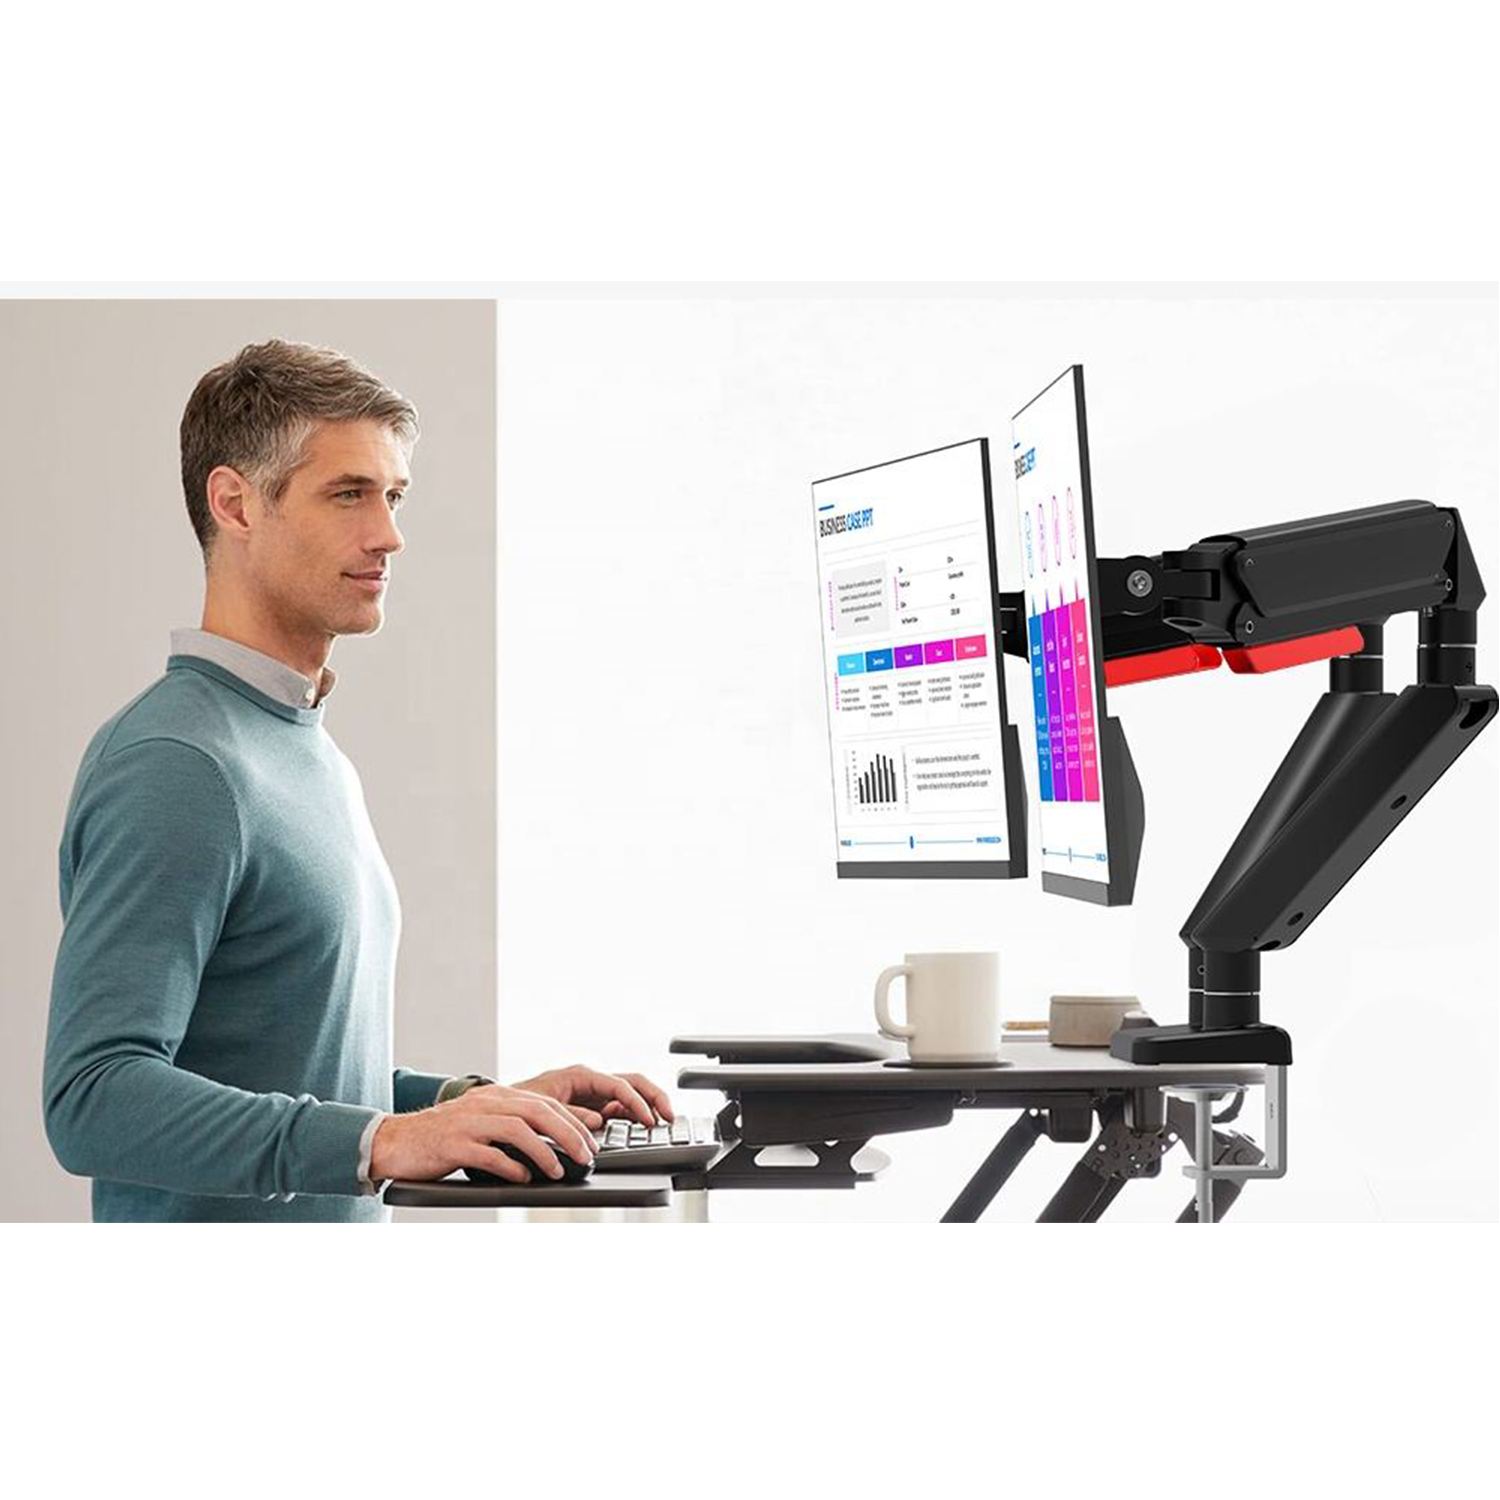 Dual Monitor Mount Gas Spring Monitor Arm Desk Mount Fully Adjustable Fits 17-32 inch Monitors